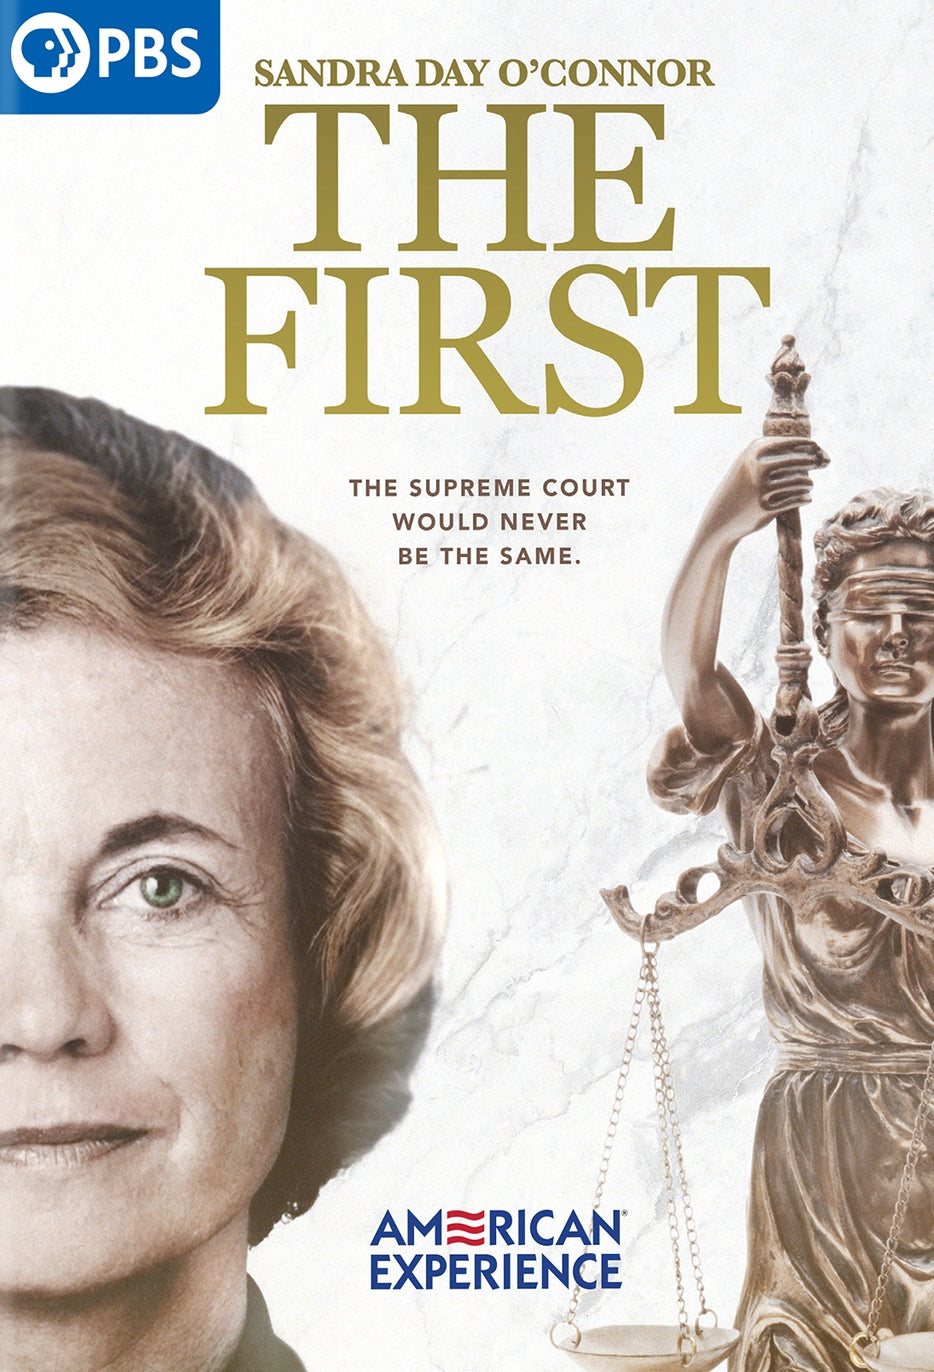 American Experience: Sandra Day O'Connor - The First cover art